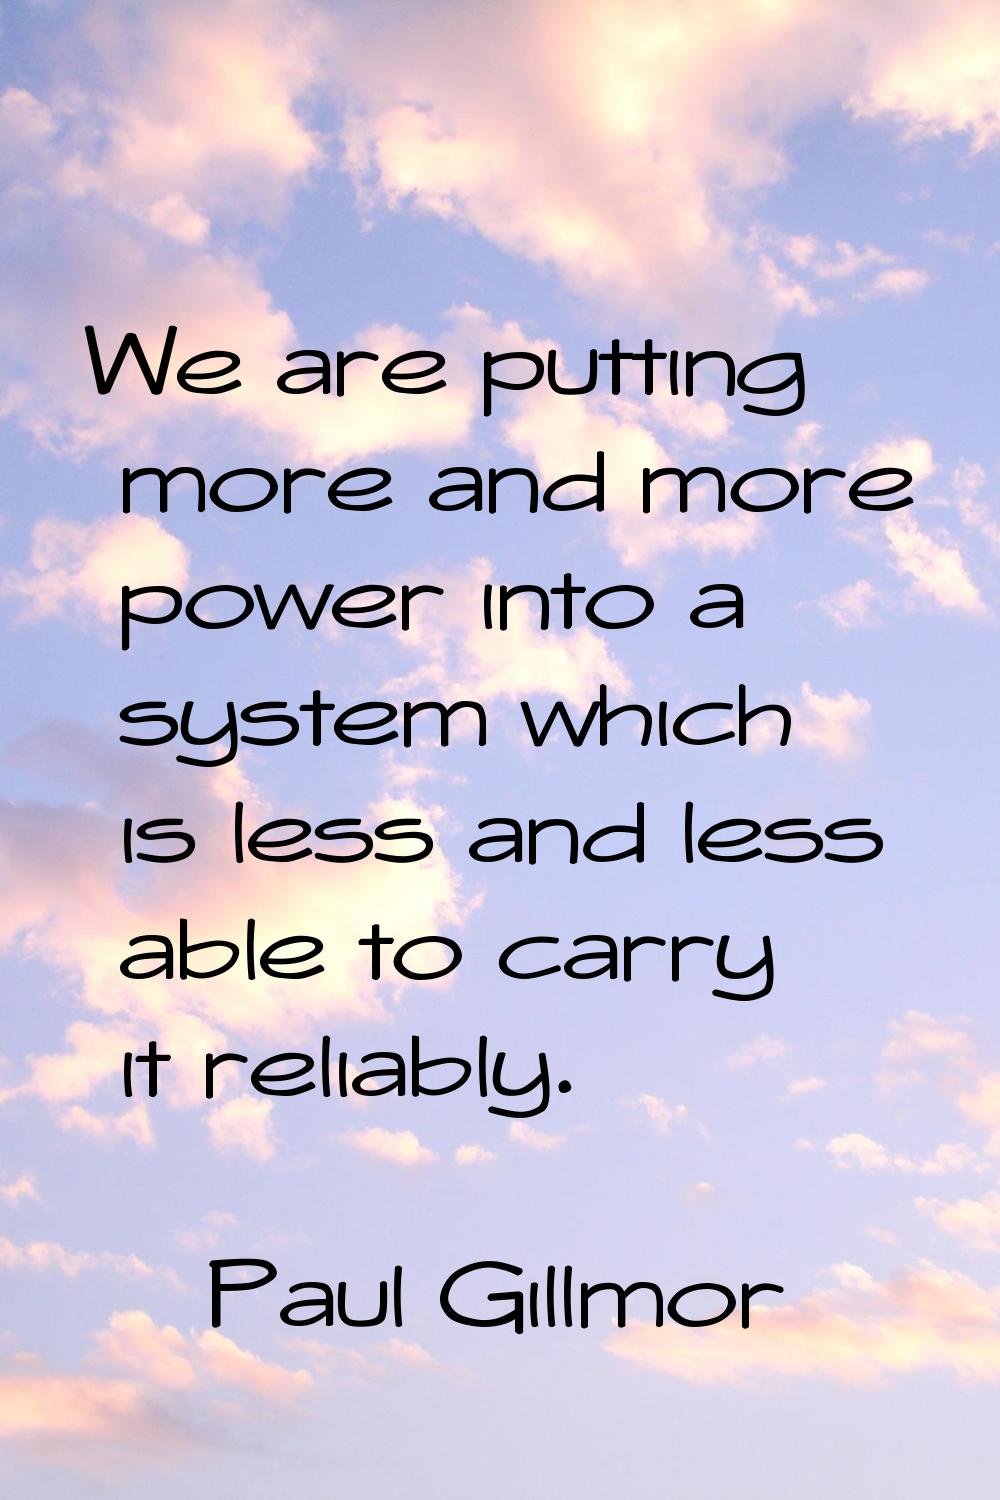 We are putting more and more power into a system which is less and less able to carry it reliably.